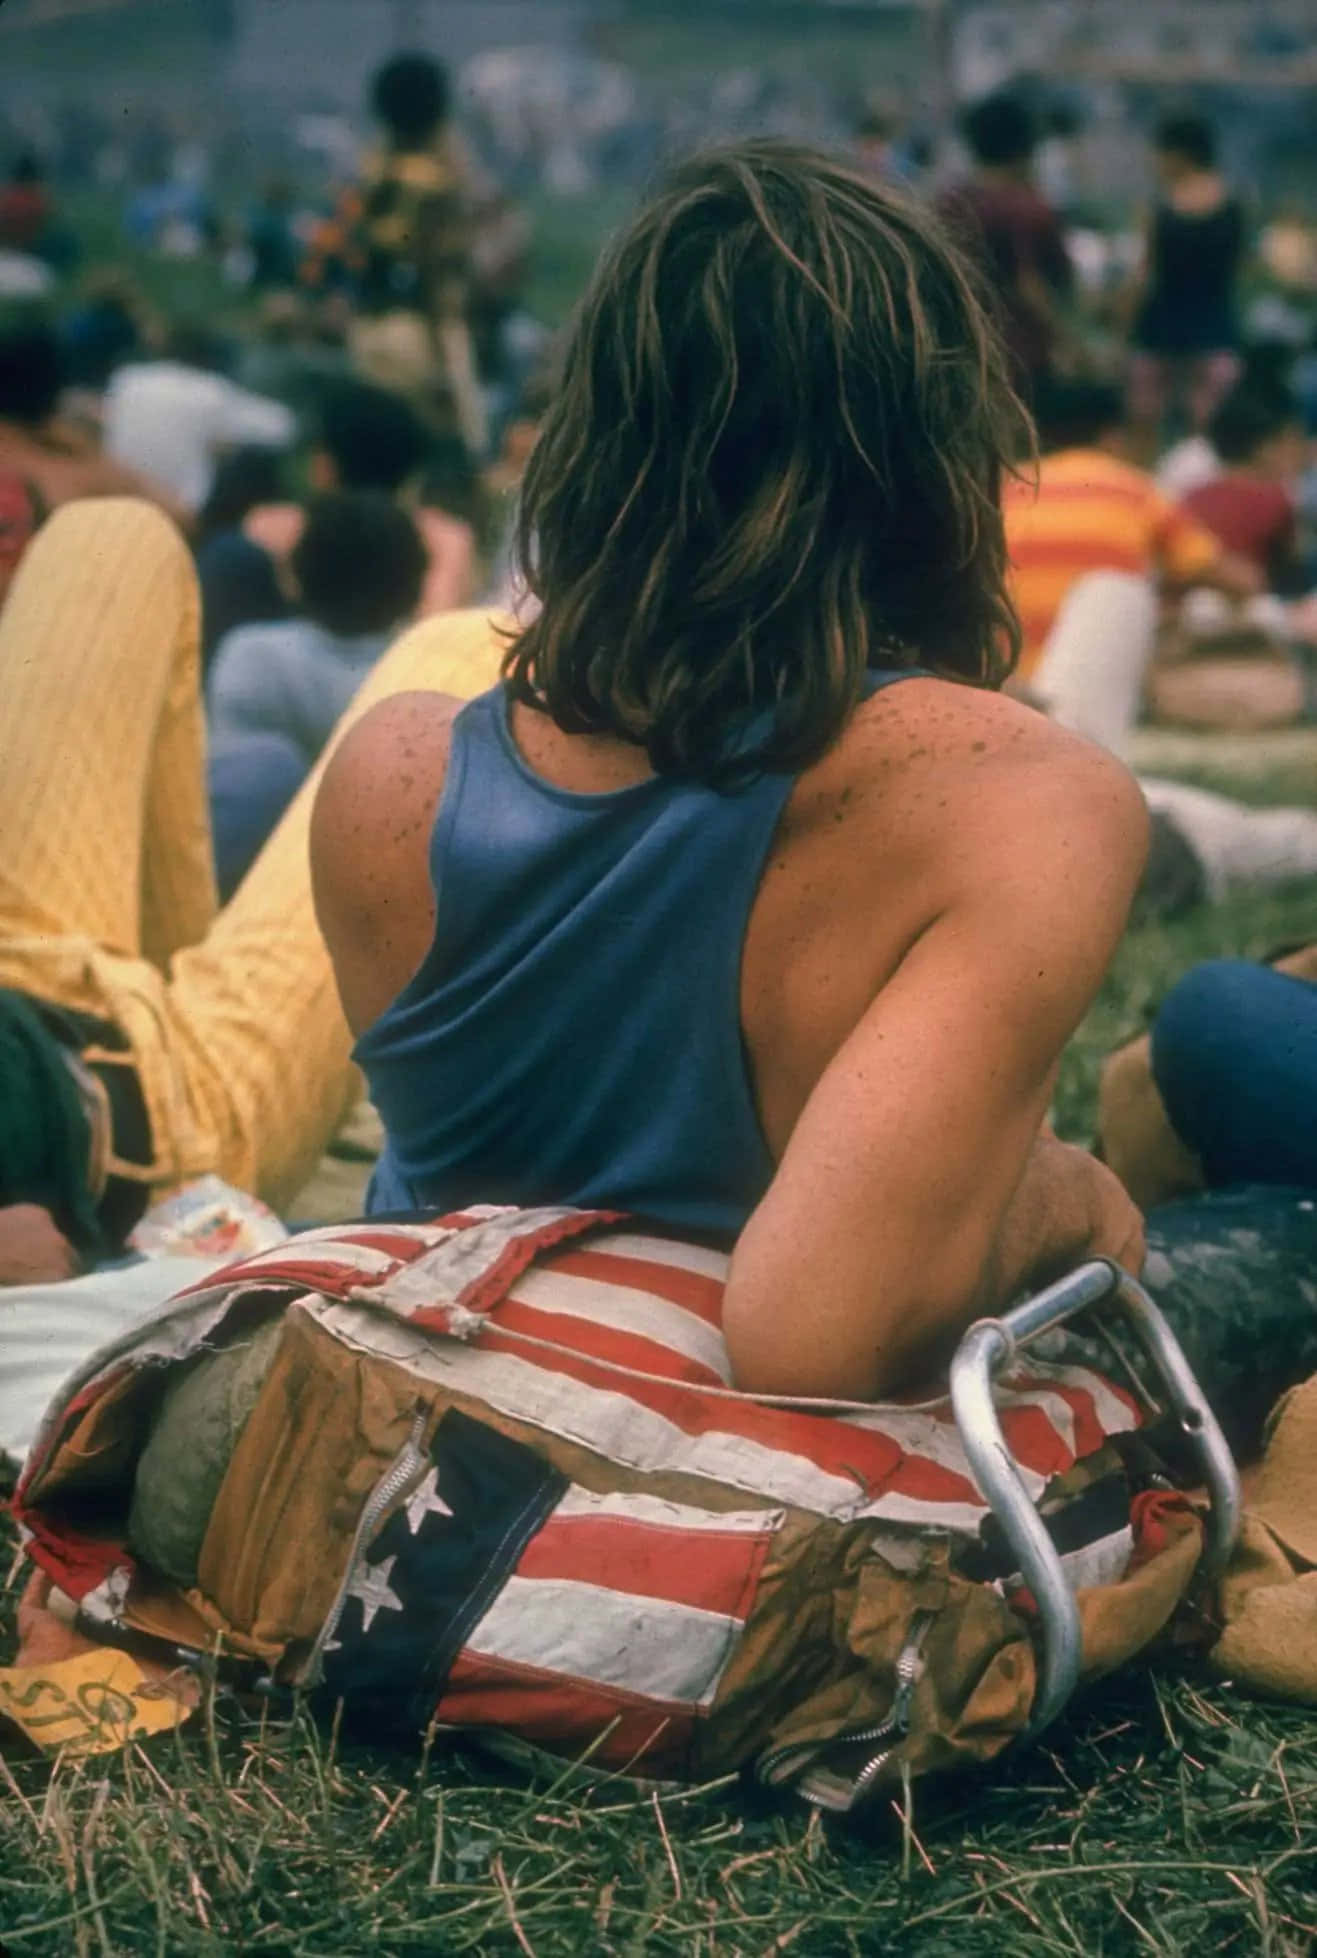 Amazing View From the Woodstock Music Festival